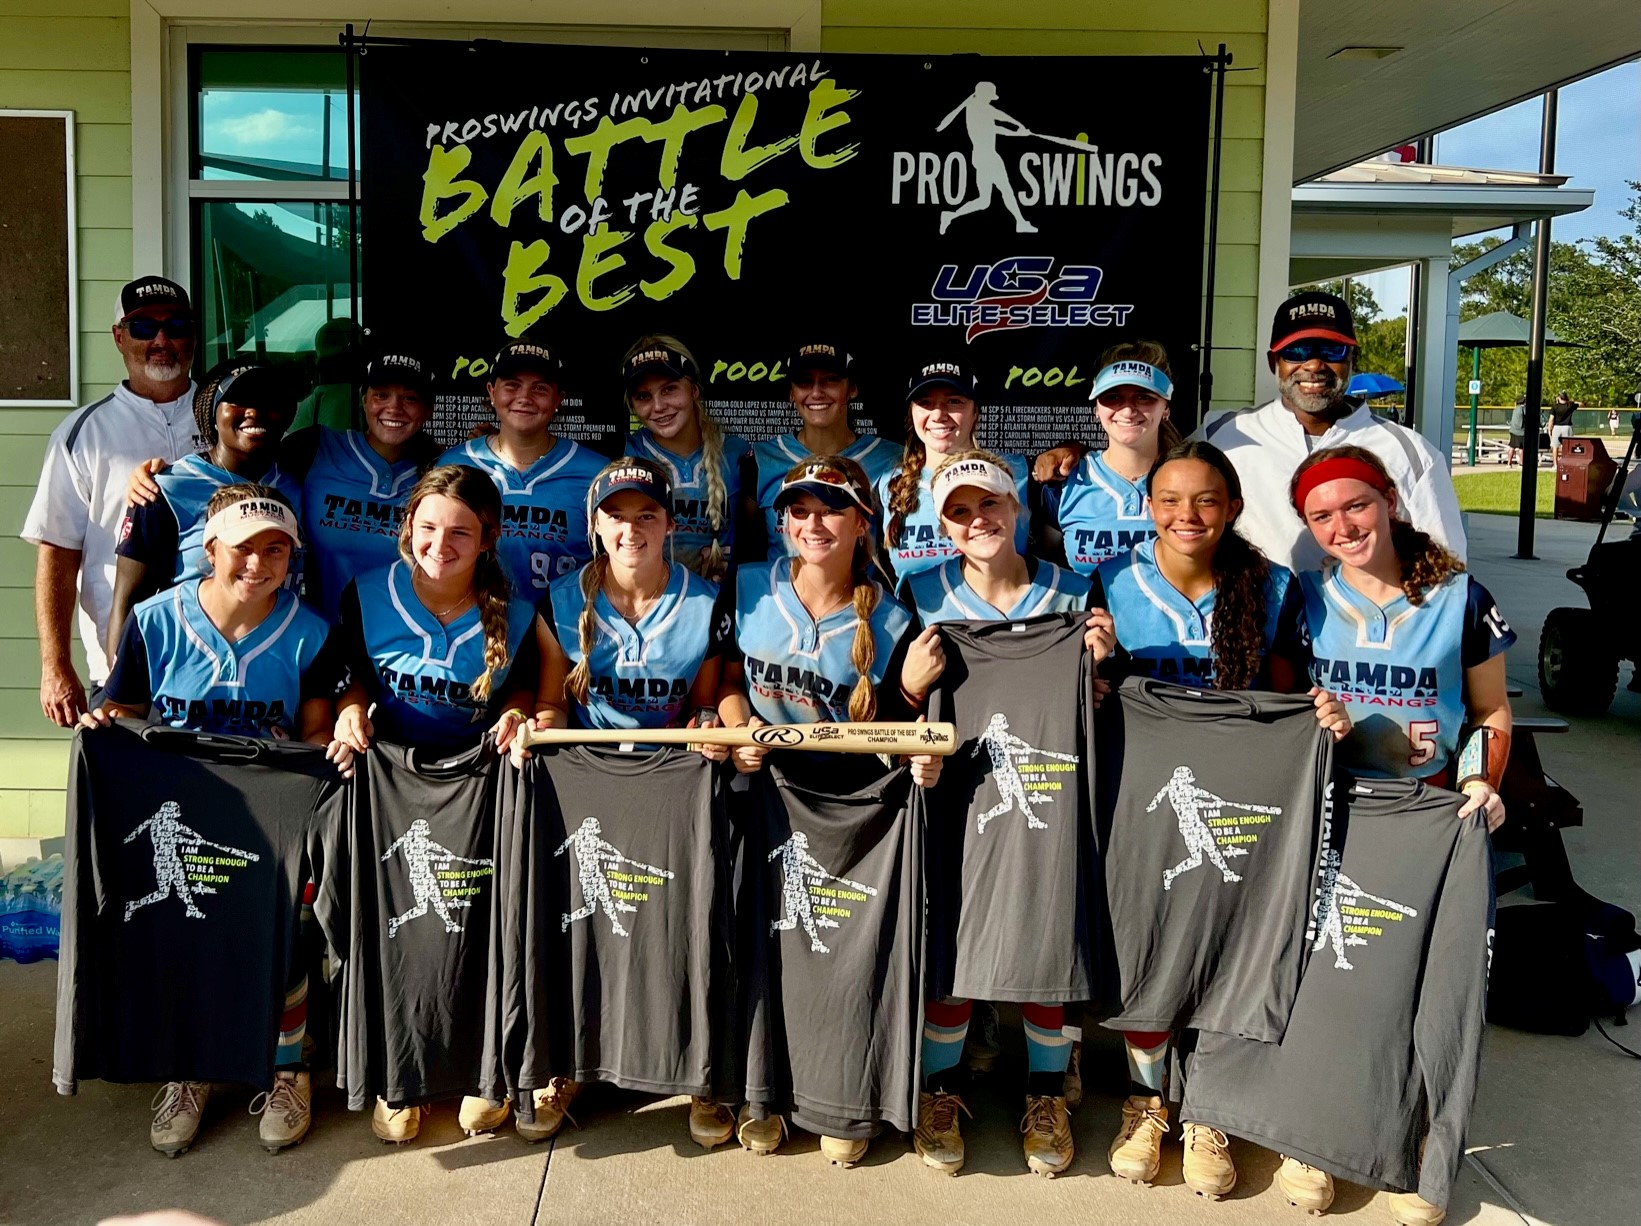 Tampa Mustangs Ray 16U Finishes PERFECT at Proswings Battle of the Best